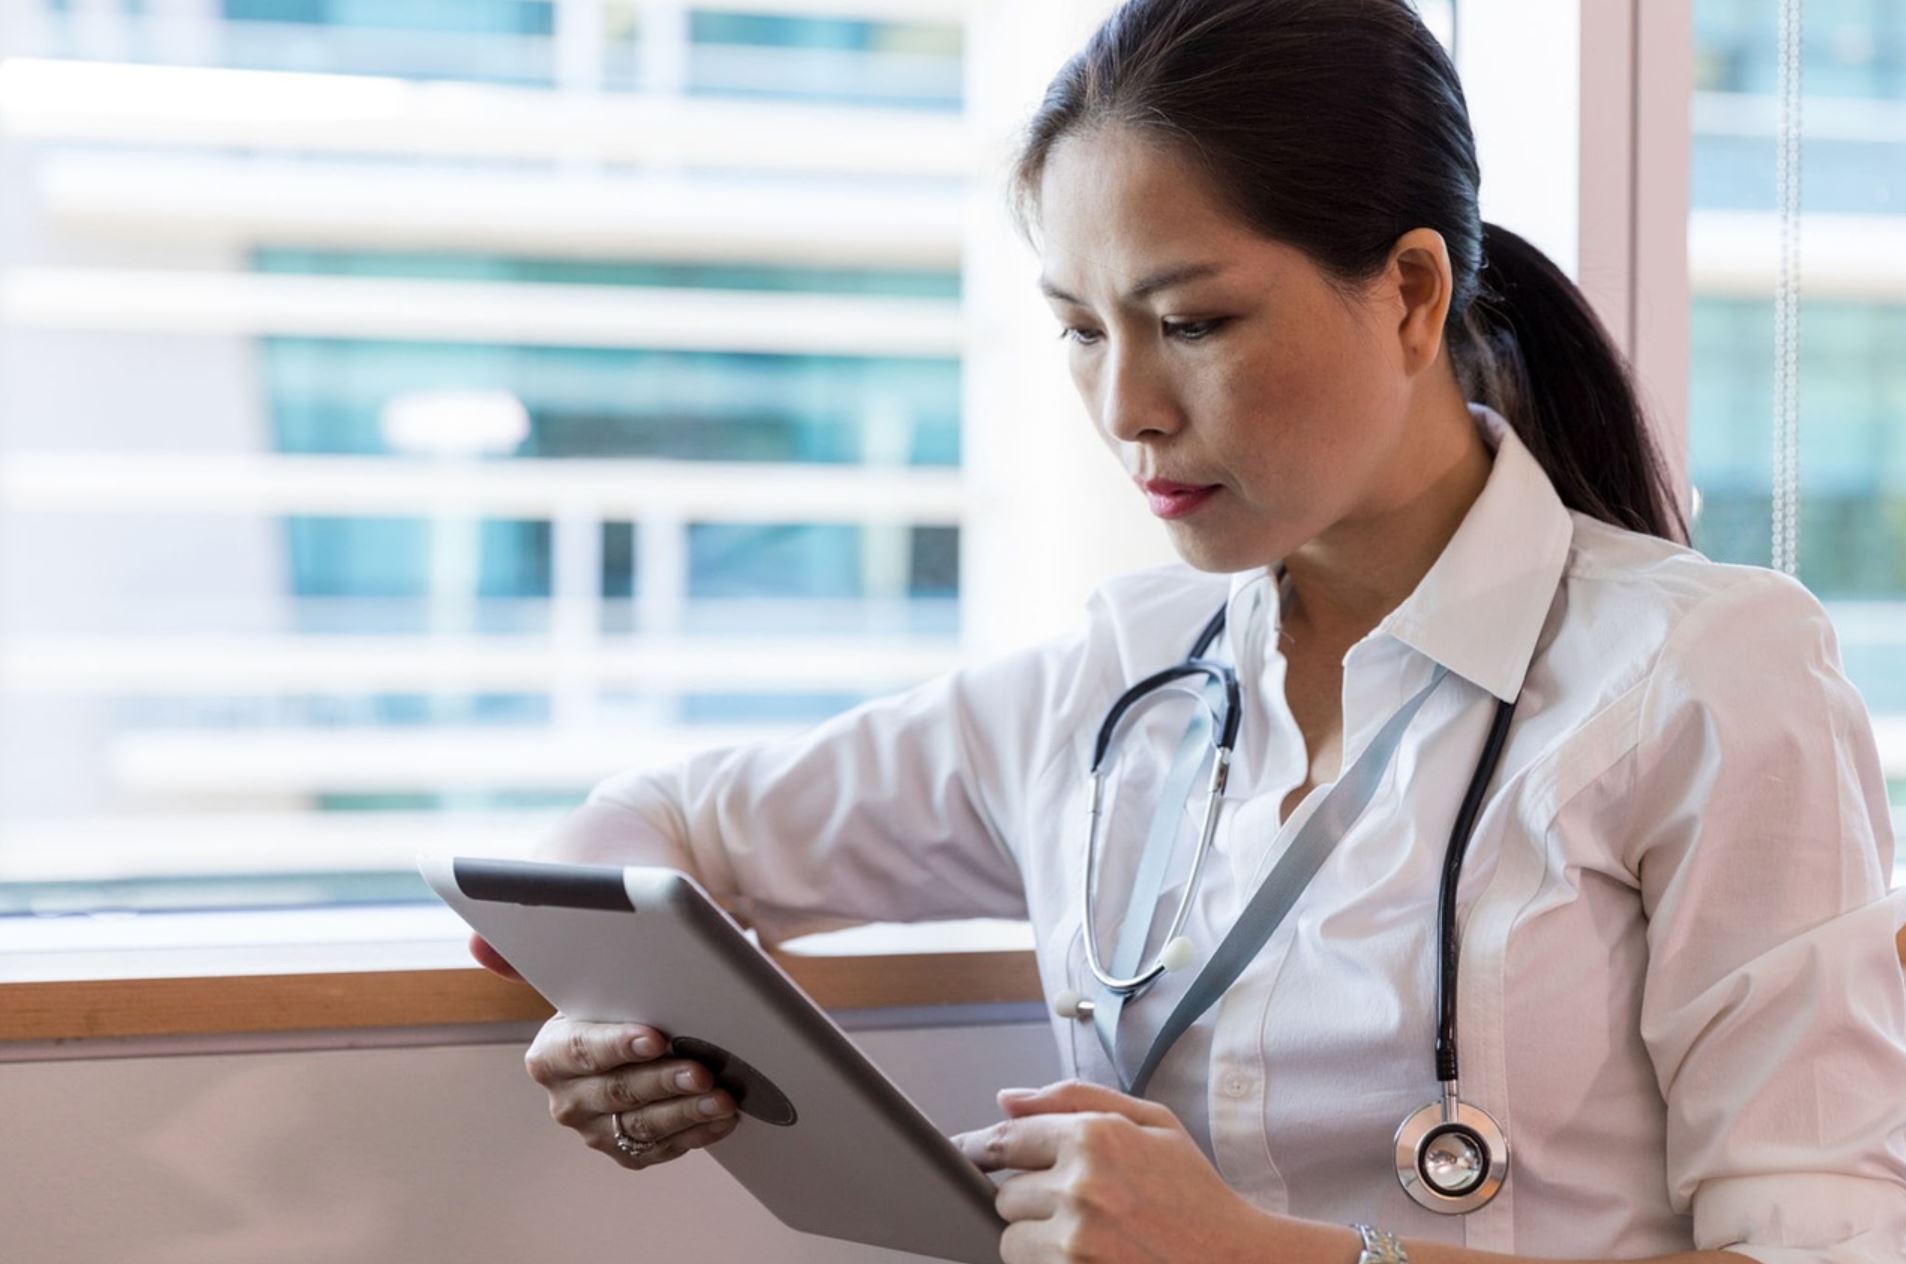 Nearly 95% of women physicians sacrifice personal time for work